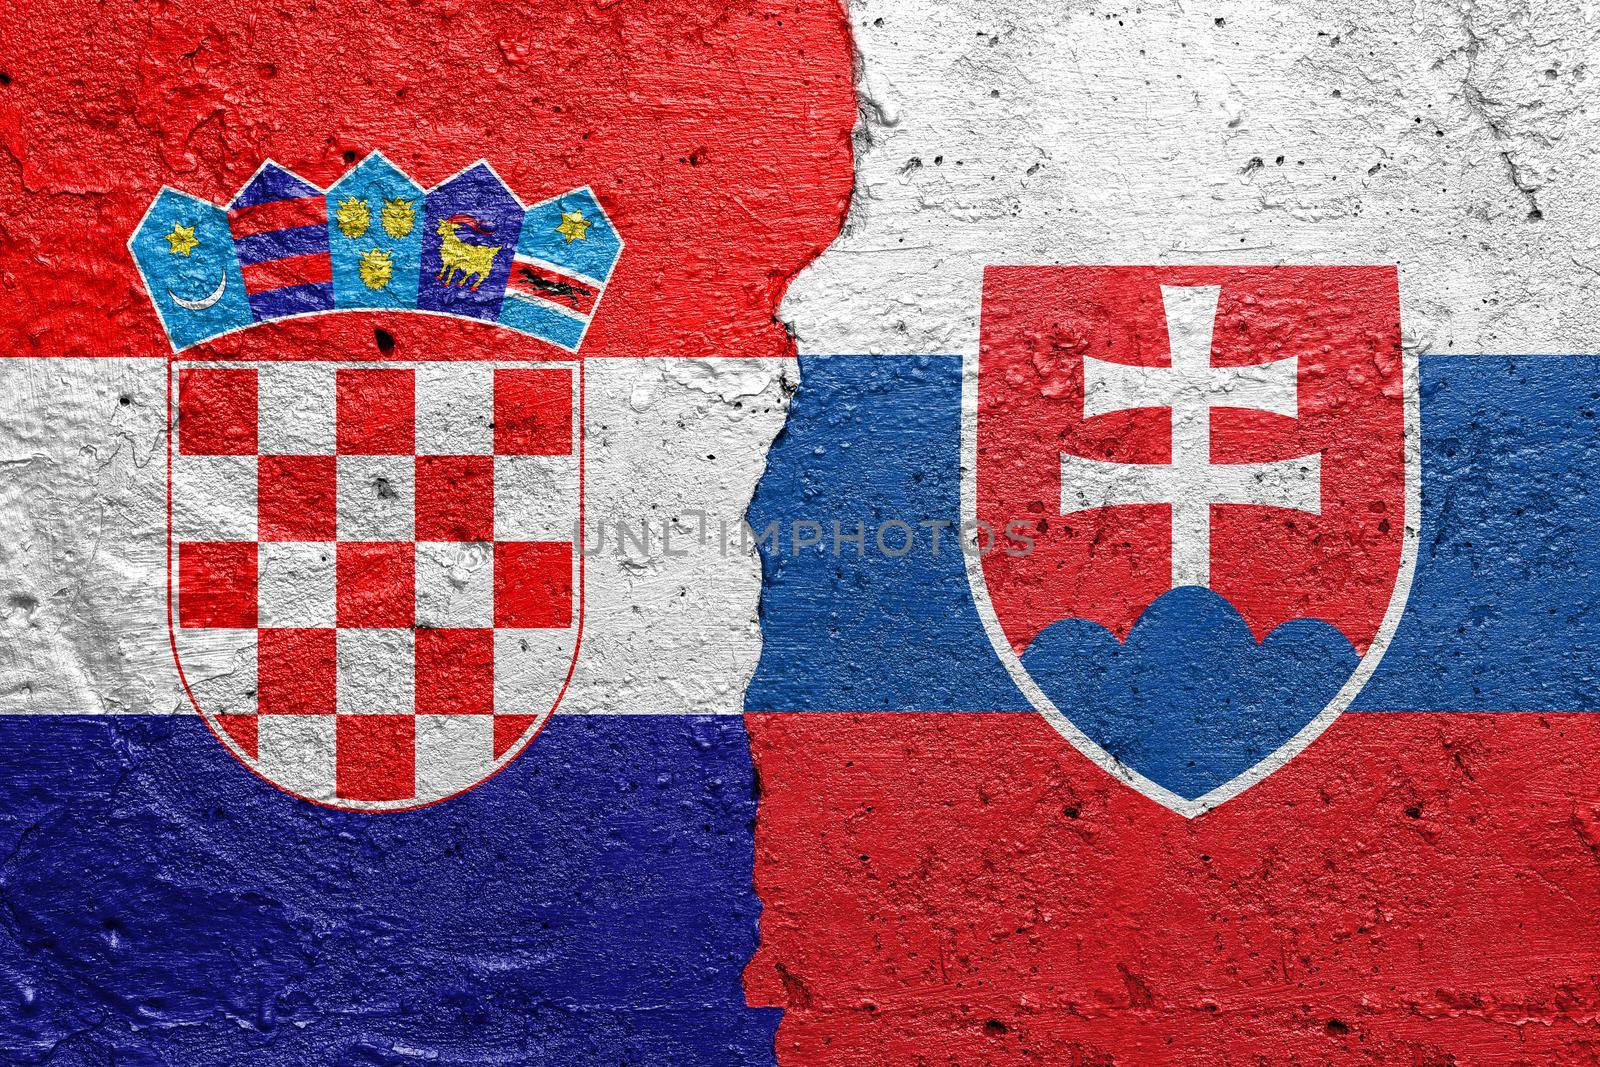 Croatia and Slovakia - Cracked concrete wall painted with a Croatian flag on the left and a Slovakian flag on the right stock photo by adamr